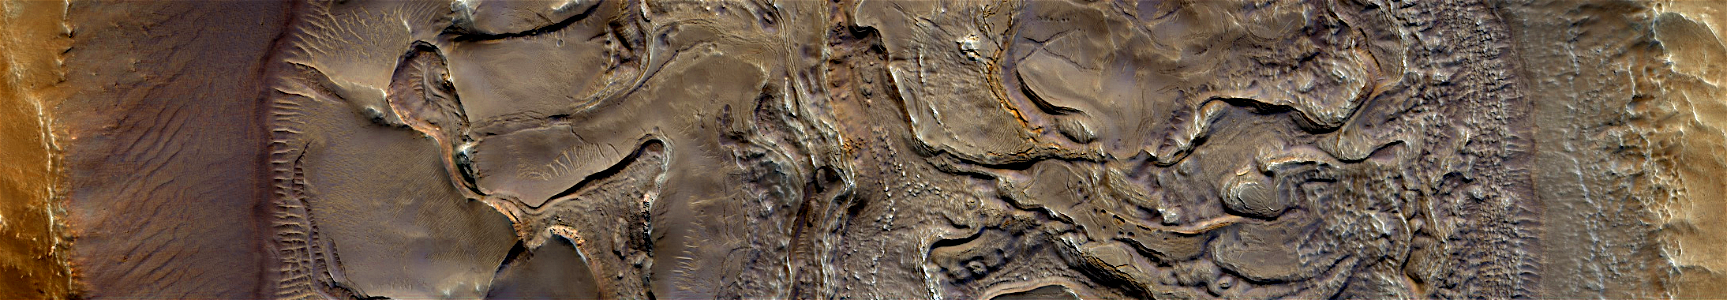 Mars - South Mid-Latitude Crater with Distinctive Floor Material